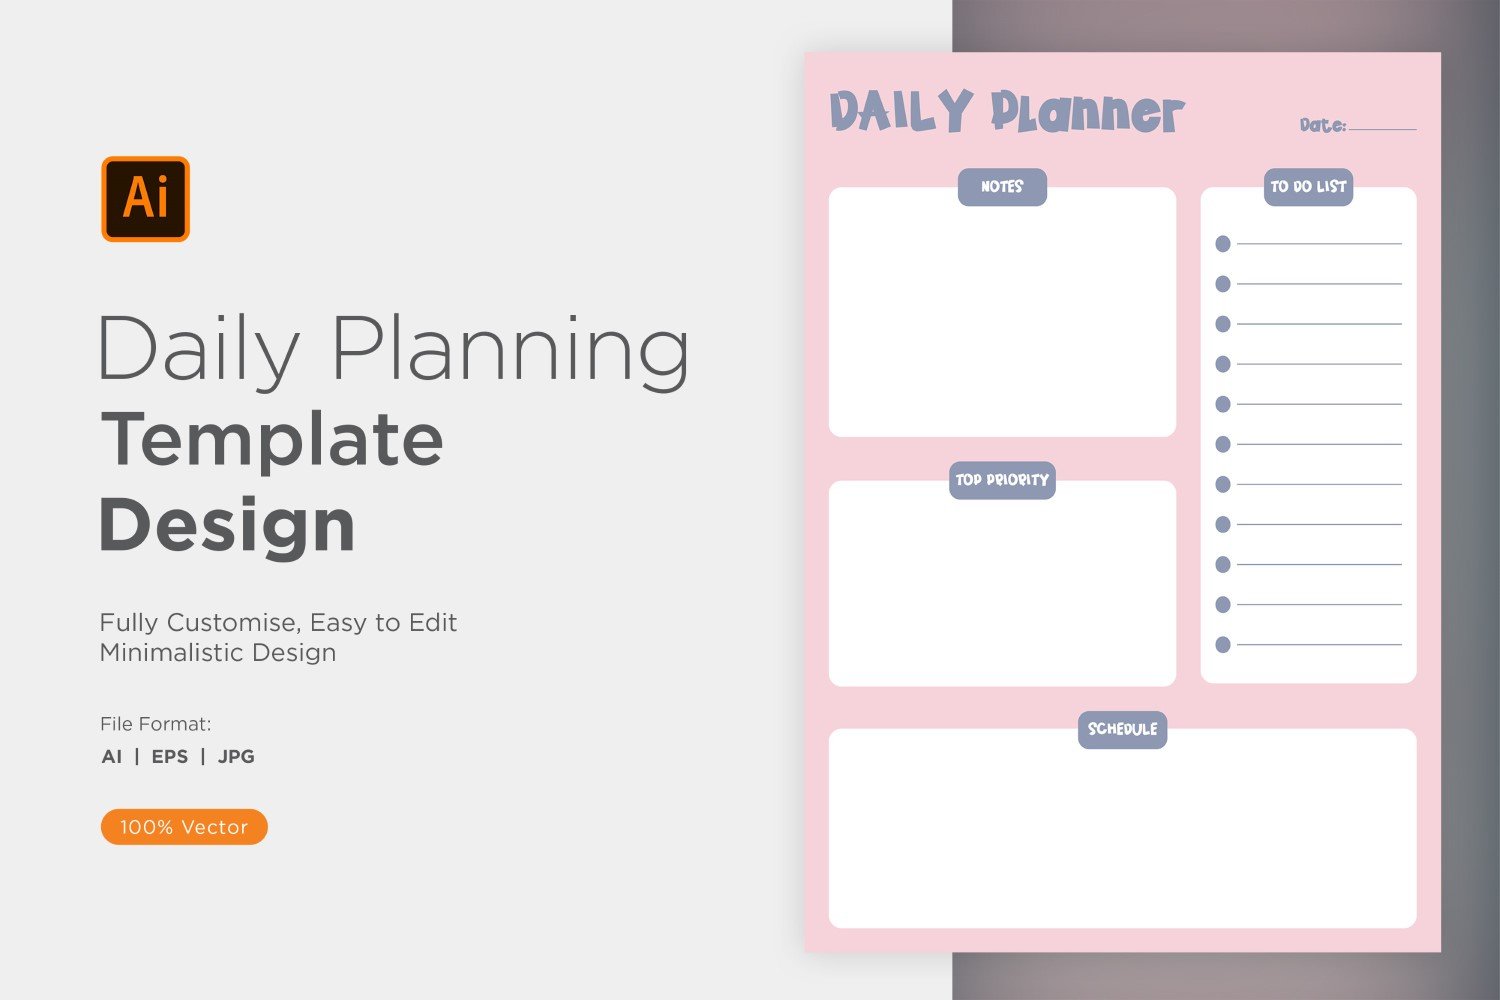 Kit Graphique #357563 Weekly Planner Divers Modles Web - Logo template Preview